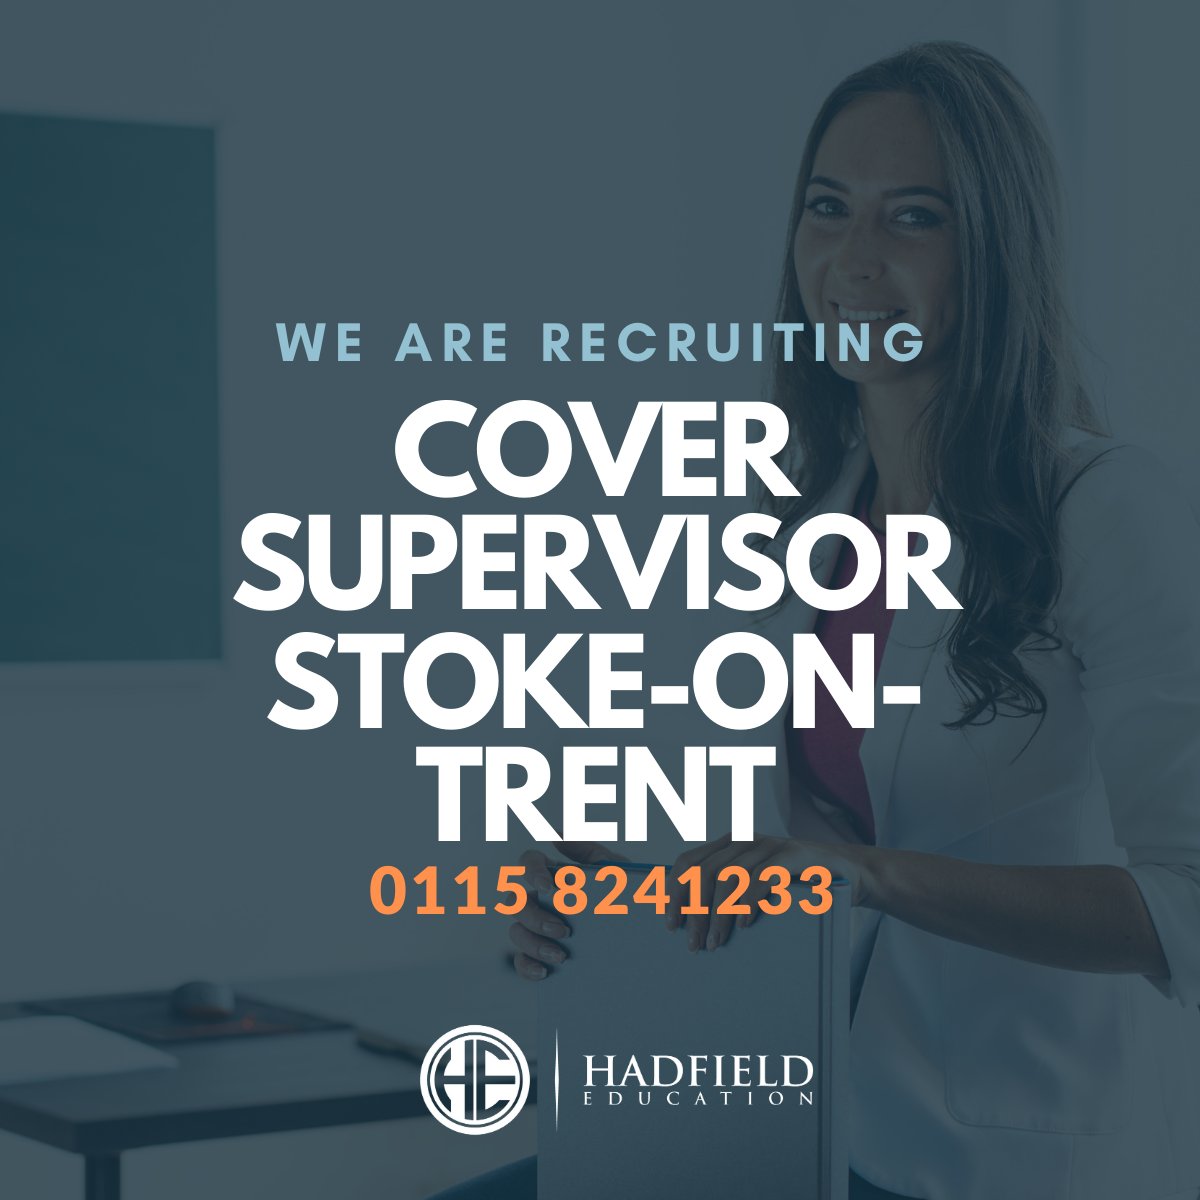 🚀 We're hiring! 🚀 Join our team as a Cover Supervisor in 📍Stoke-on-Trent 🎓 Apply now and be part of our dynamic team! 💼 #StokeOnTrentJobs #TeachingJobs #CoverSupervisorJobs 📝 bit.ly/3OS5WYX